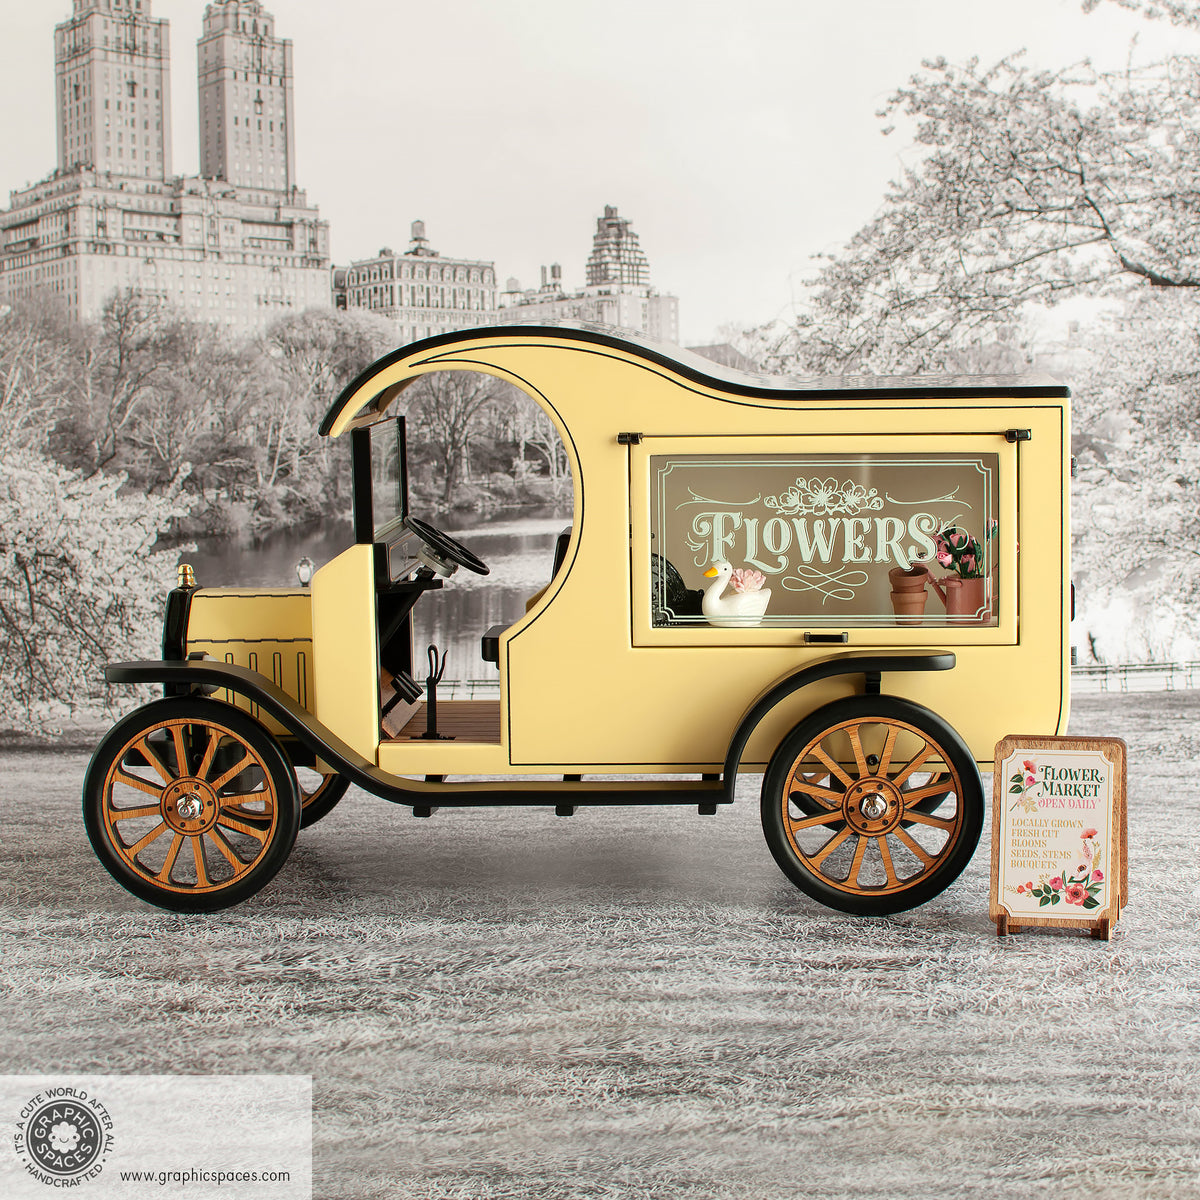 1:12 Scale Room Box Yellow Flower Shop Truck Model T C cab. Driver side view. Counter display with window closed.  